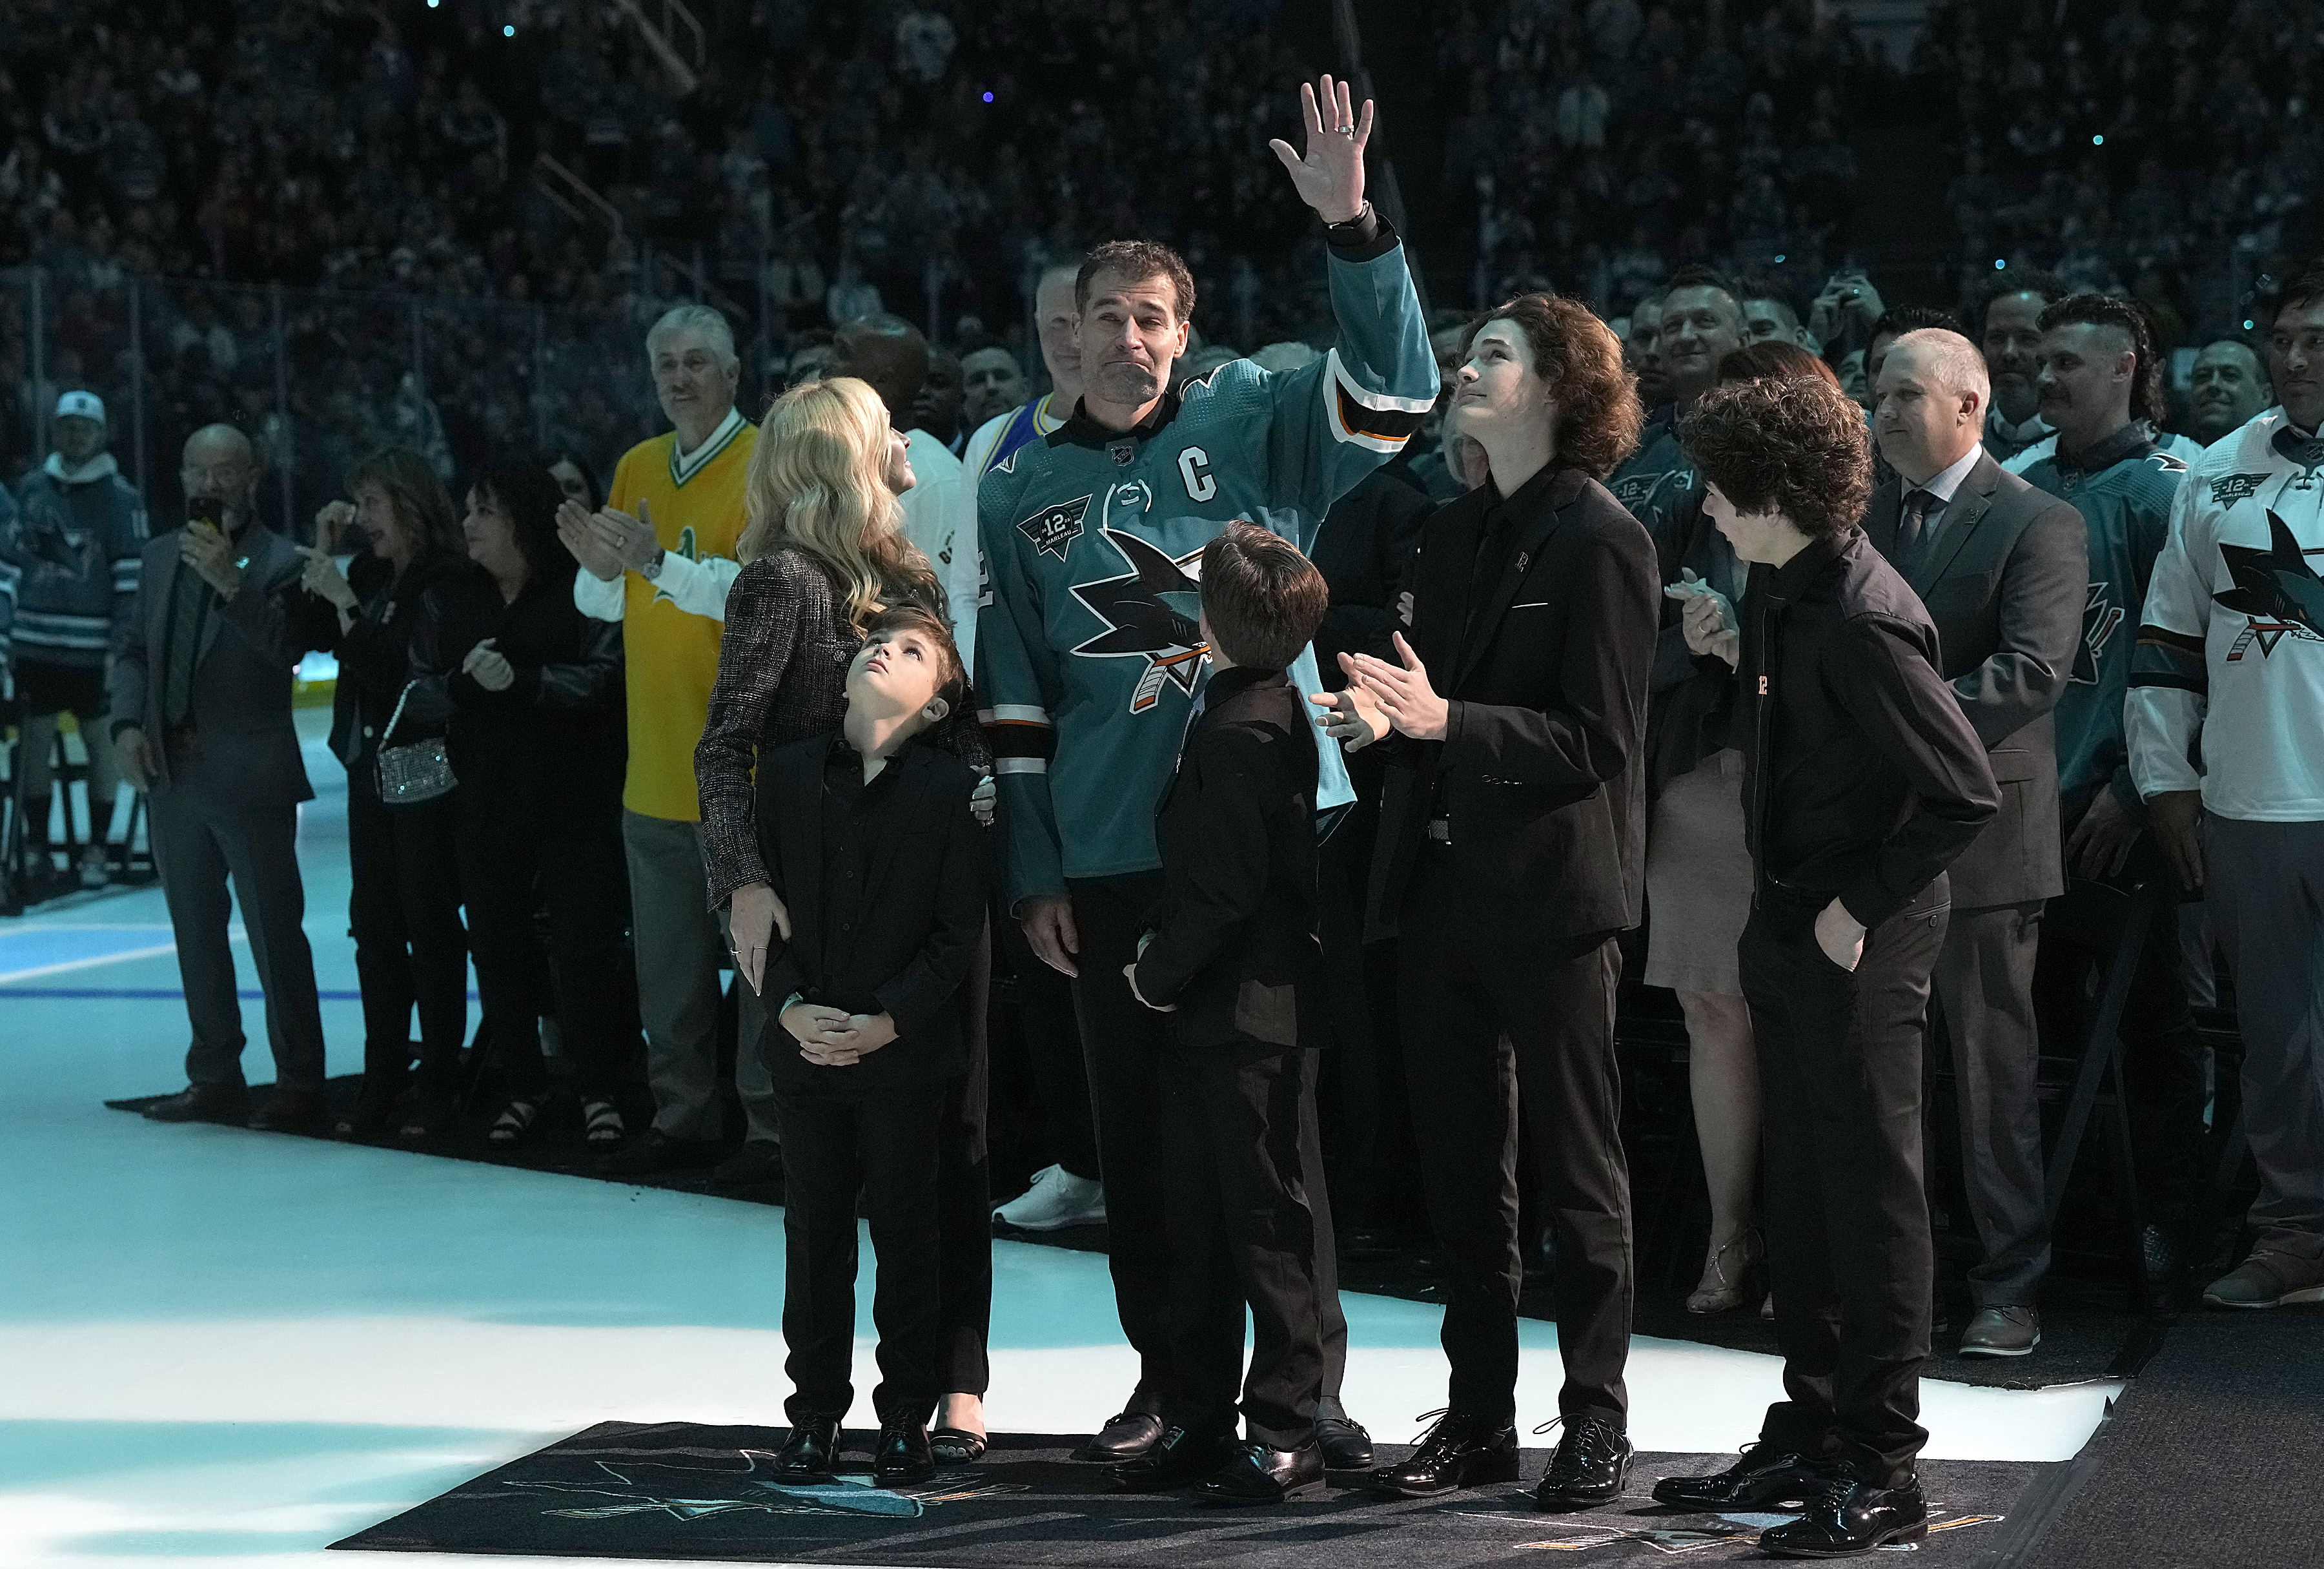 I was living my dream every day': Sharks retire Patrick Marleau's No. 12